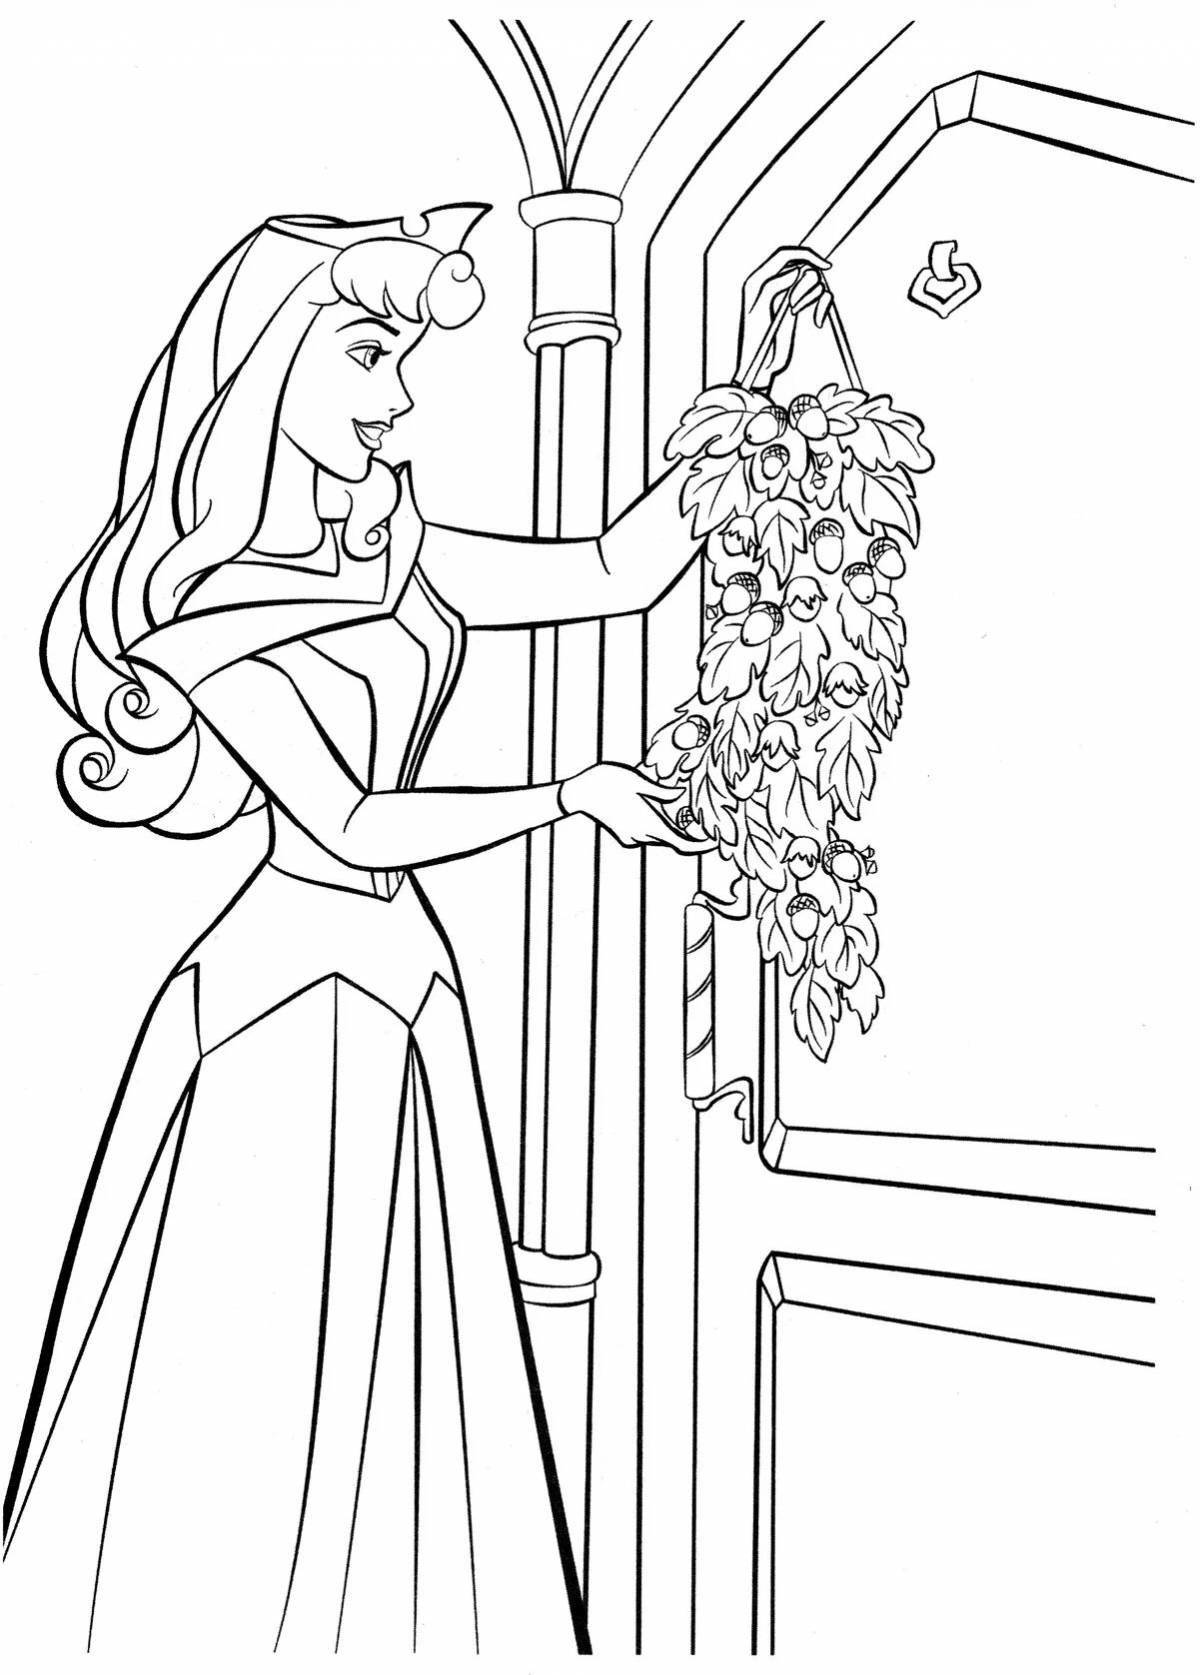 Magic coloring book sleeping beauty for kids